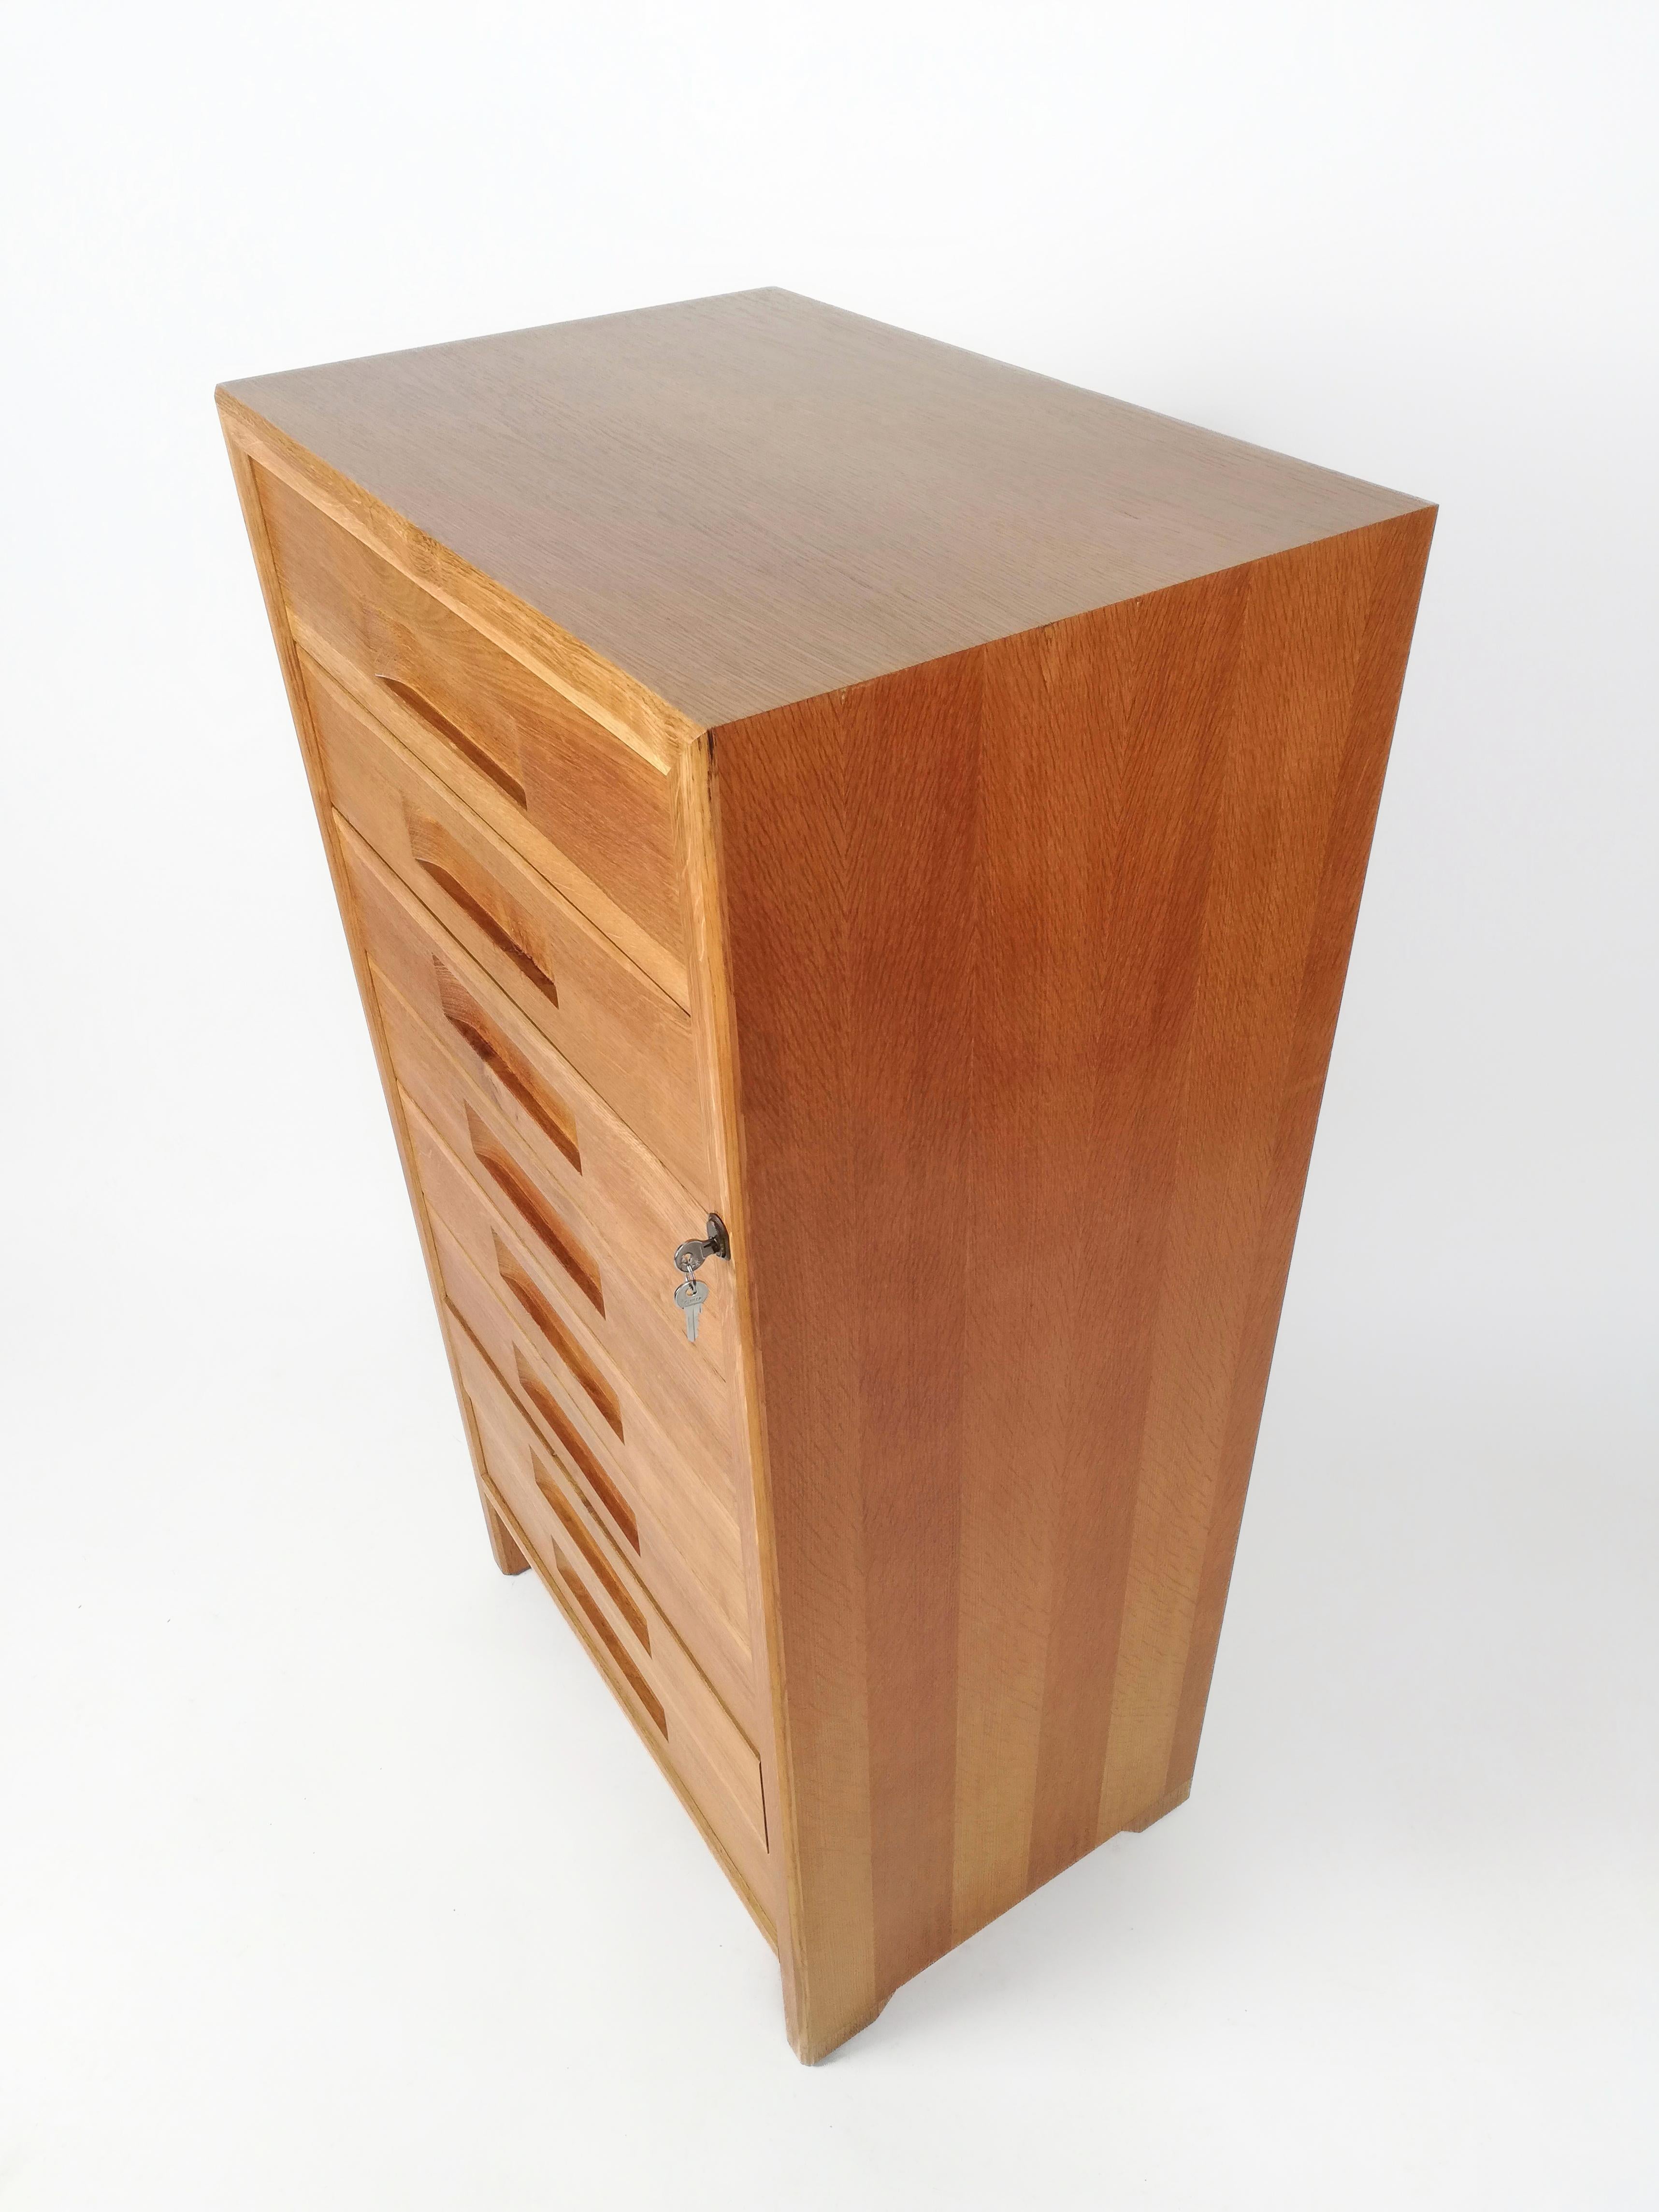 20th Century Italian Vintage Oak and Birch Wood Office Tallboy Chest of Drawers, 1960s For Sale